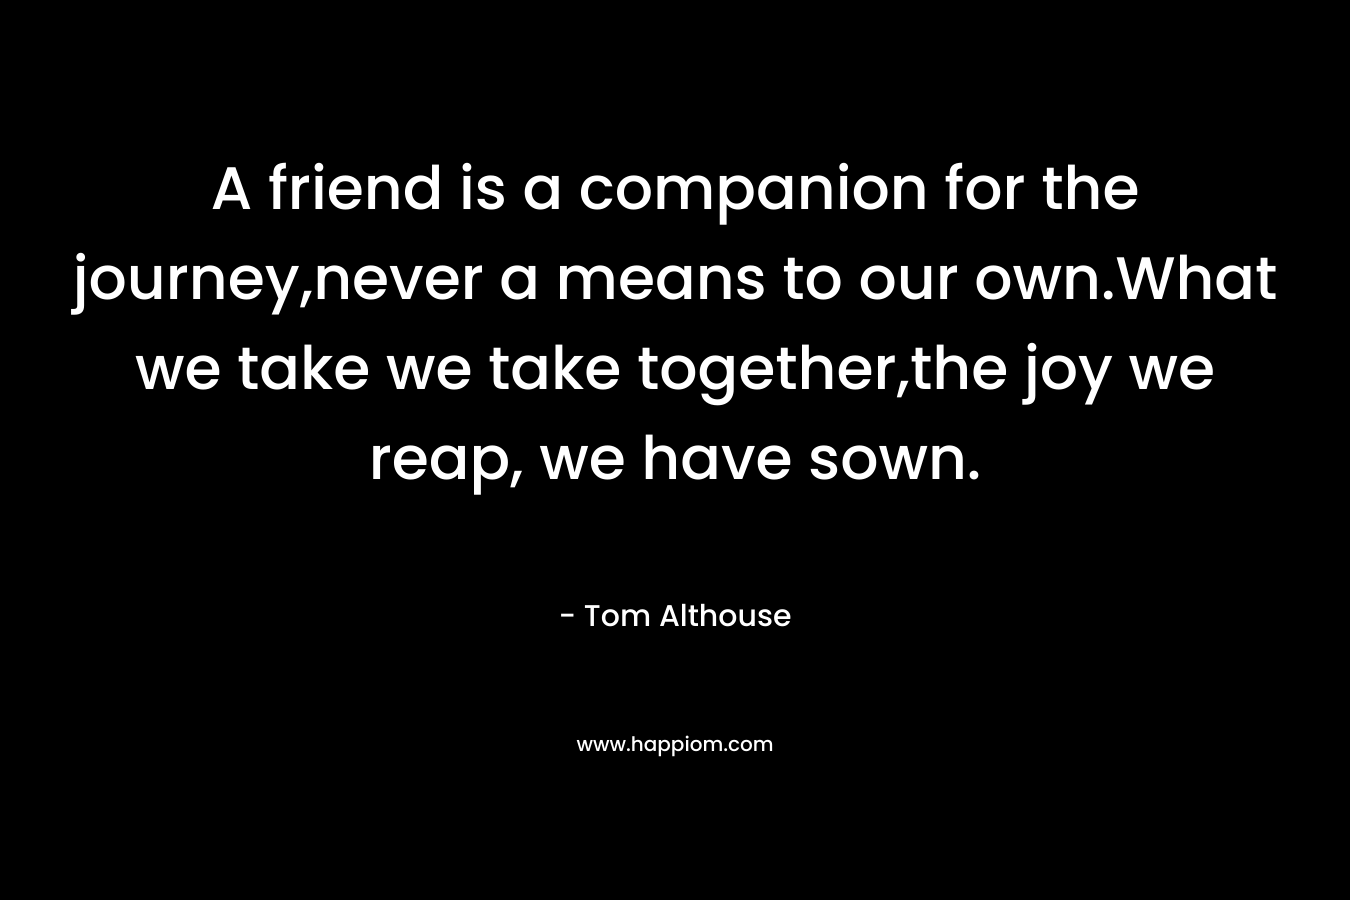 A friend is a companion for the journey,never a means to our own.What we take we take together,the joy we reap, we have sown.